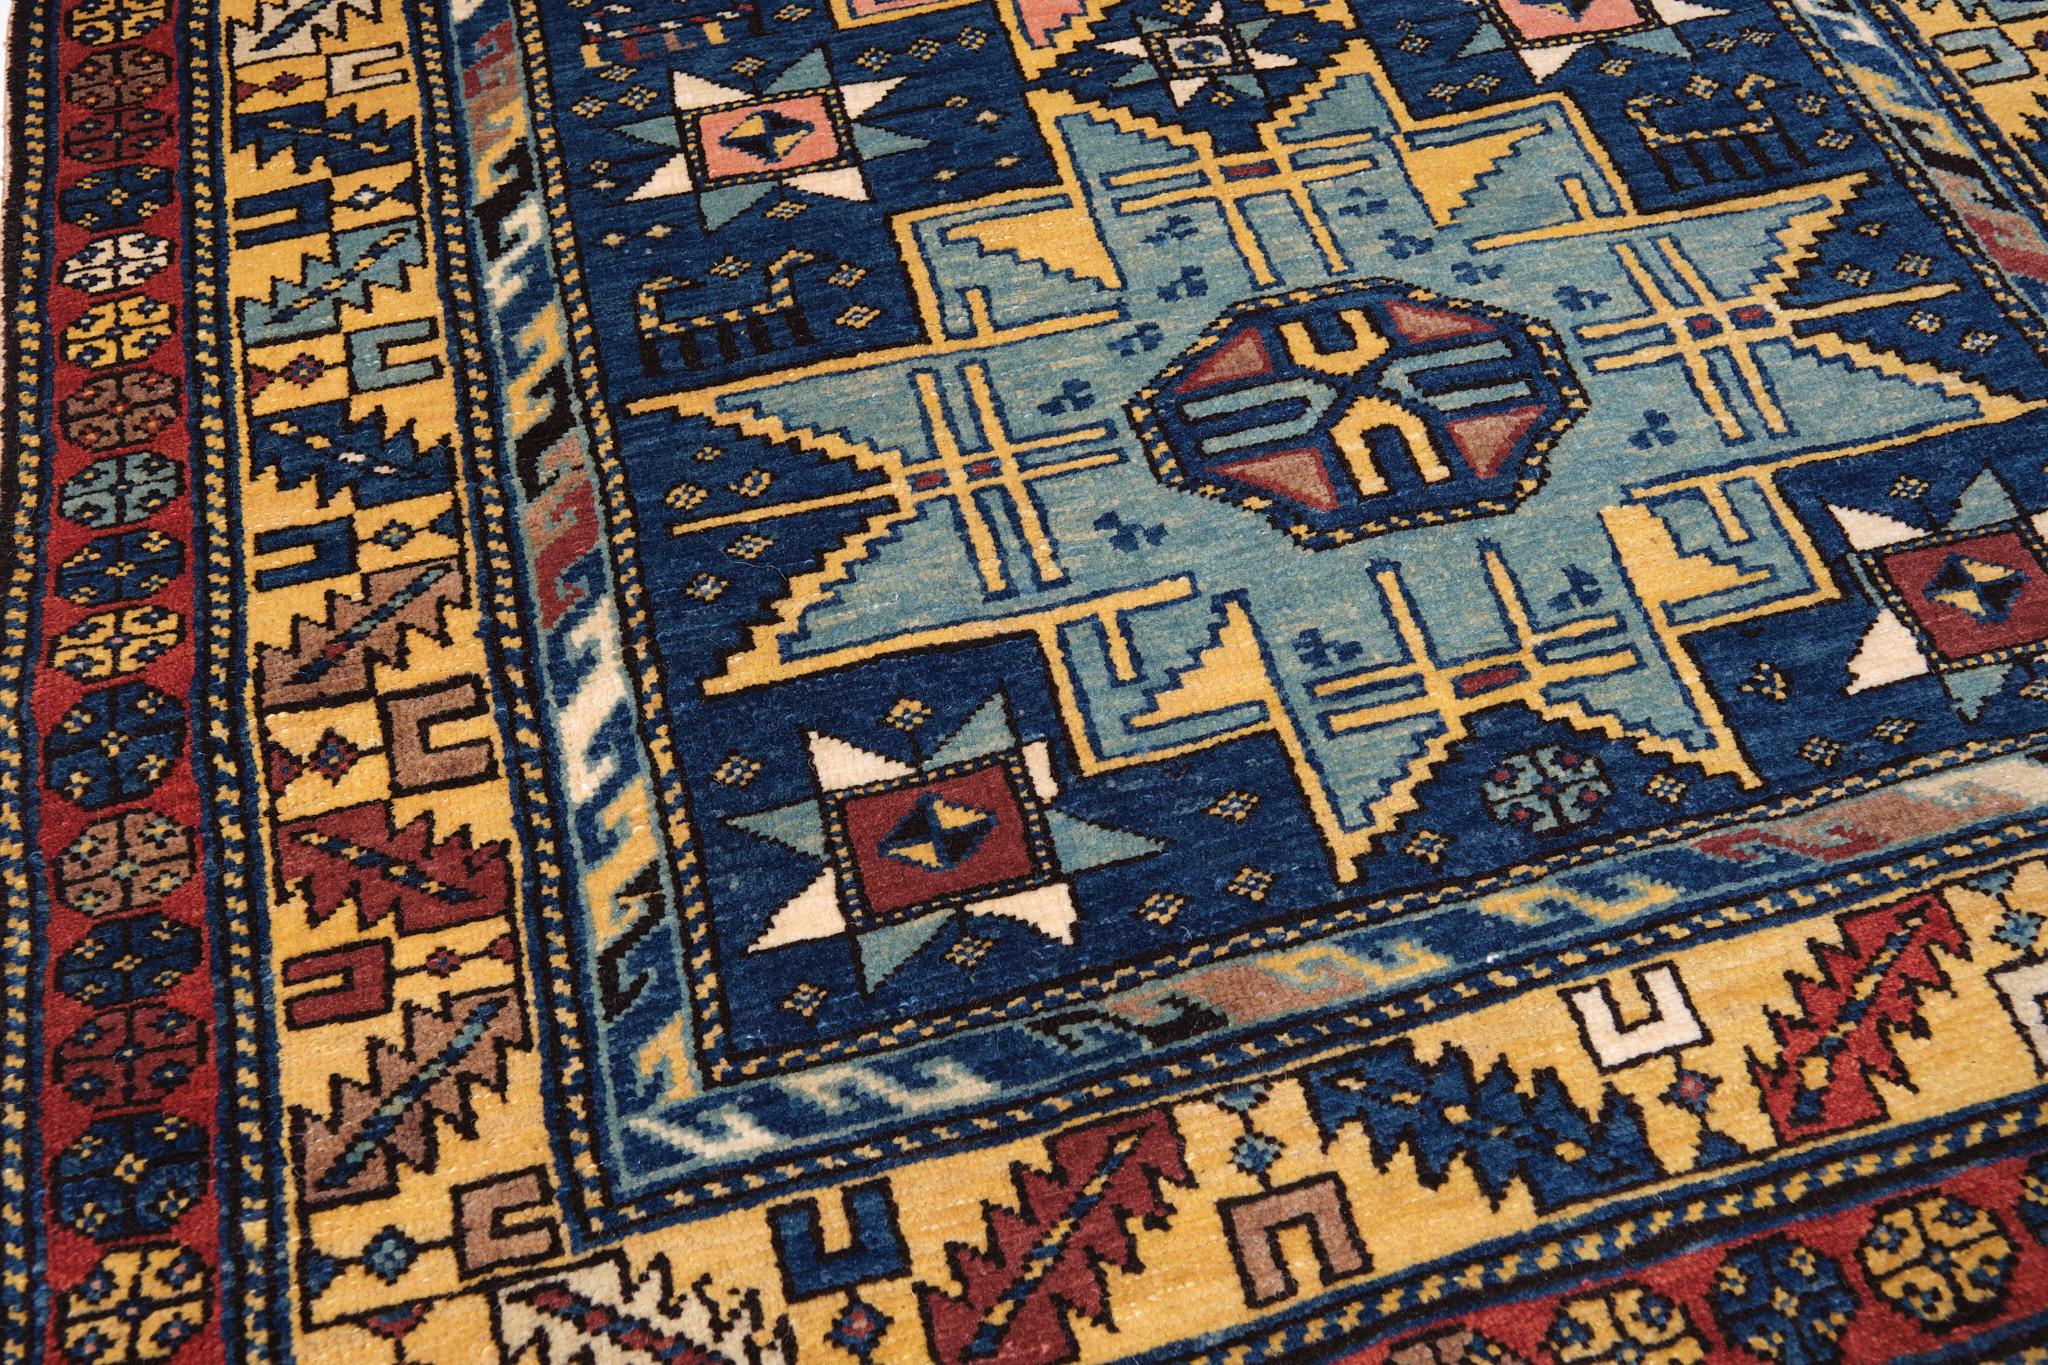 The source of the rug comes from the book Orient Star – A Carpet Collection, E. Heinrich Kirchheim, Hali Publications Ltd, 1993 nr.30 and Oriental Rugs Volume 1 Caucasian, Ian Bennett, Oriental Textile Press, Aberdeen 1993, pg.326. This is a large